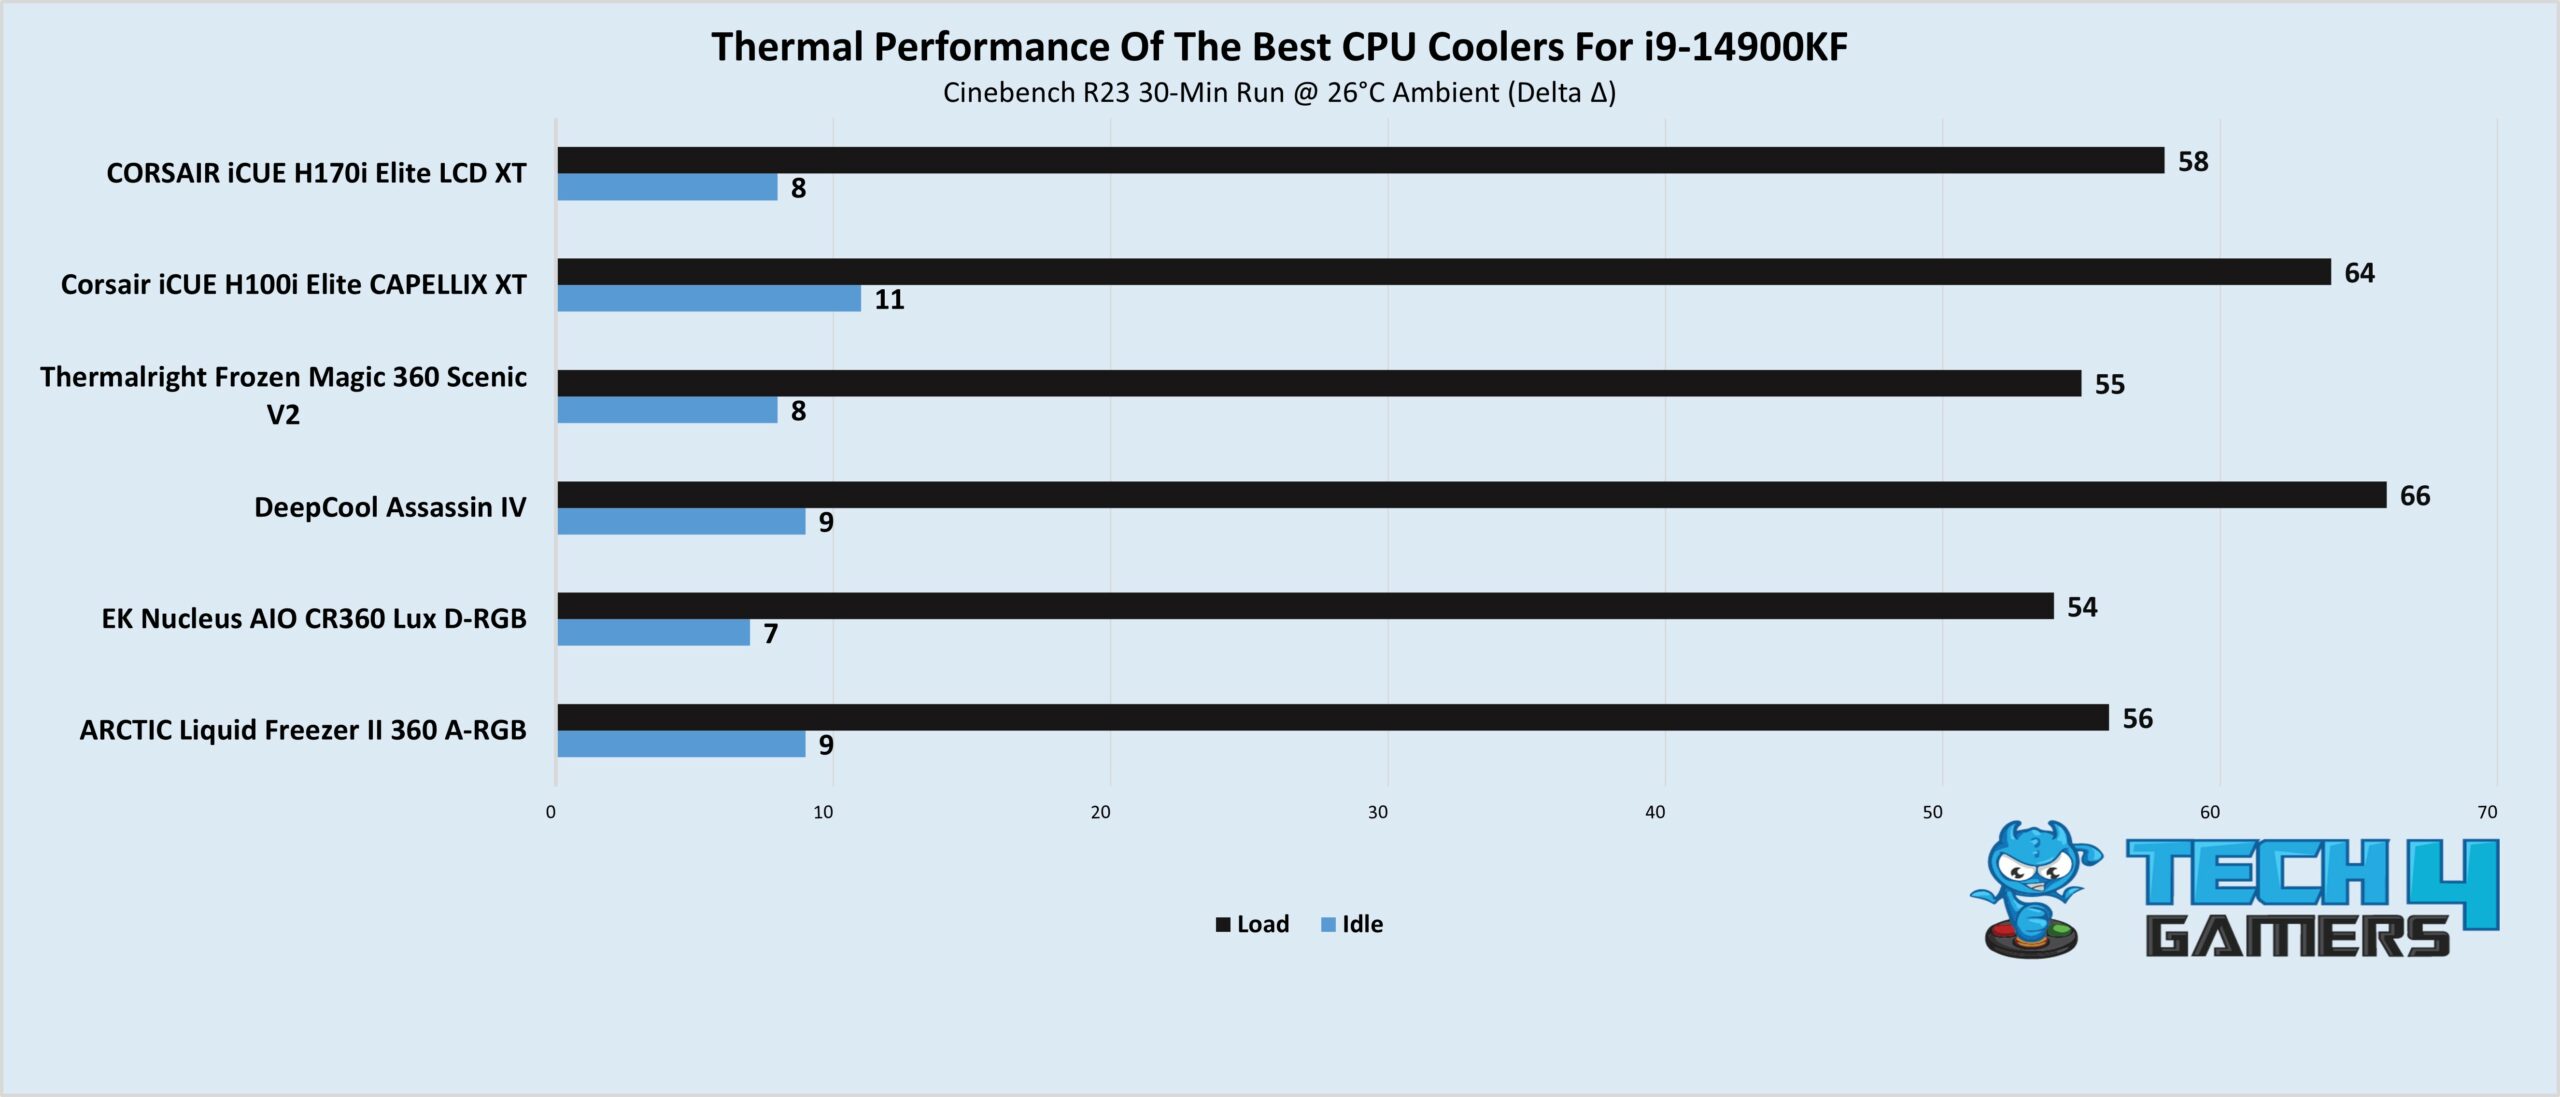 Thermal Performance Of The Best CPU Coolers For i9-14900KF